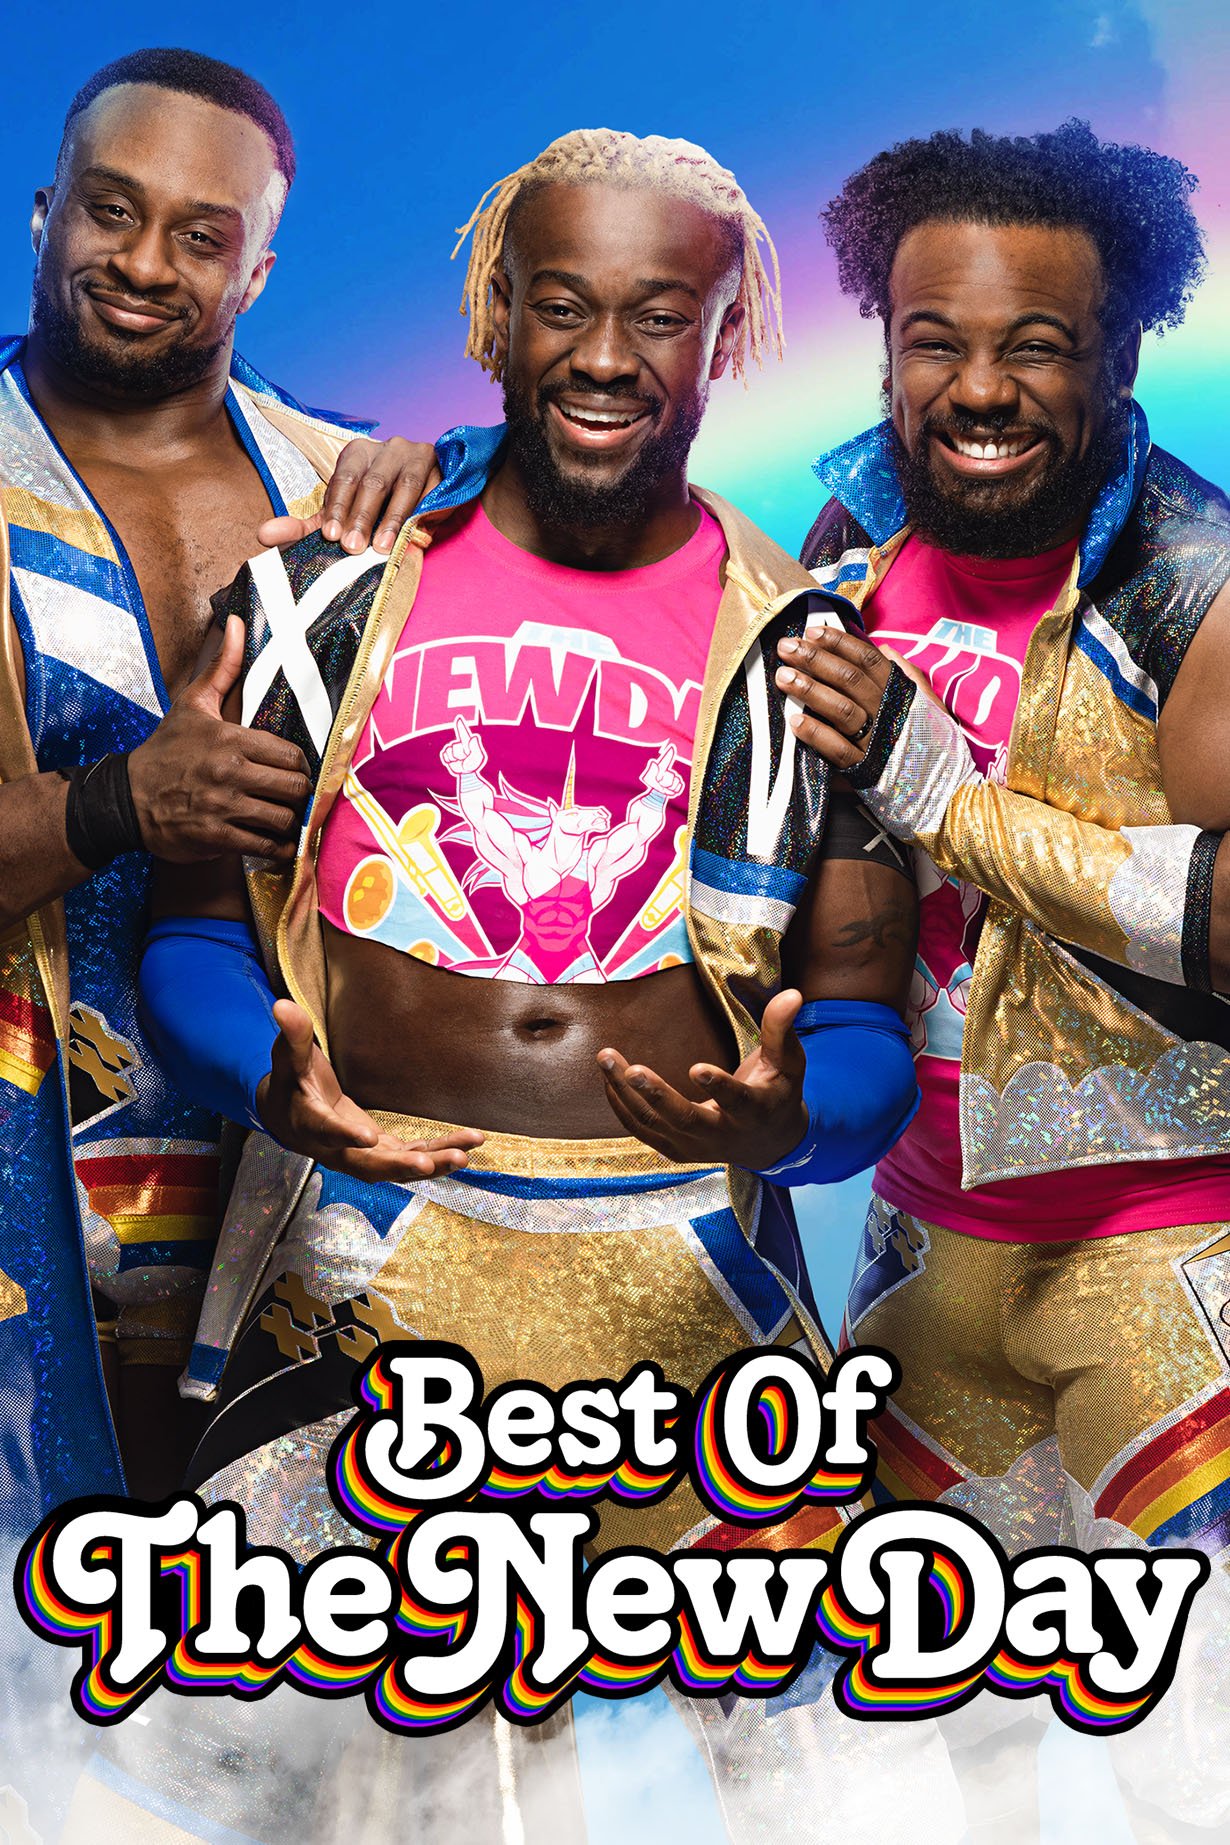 The Best of WWE: The Best of the New Day (2020)